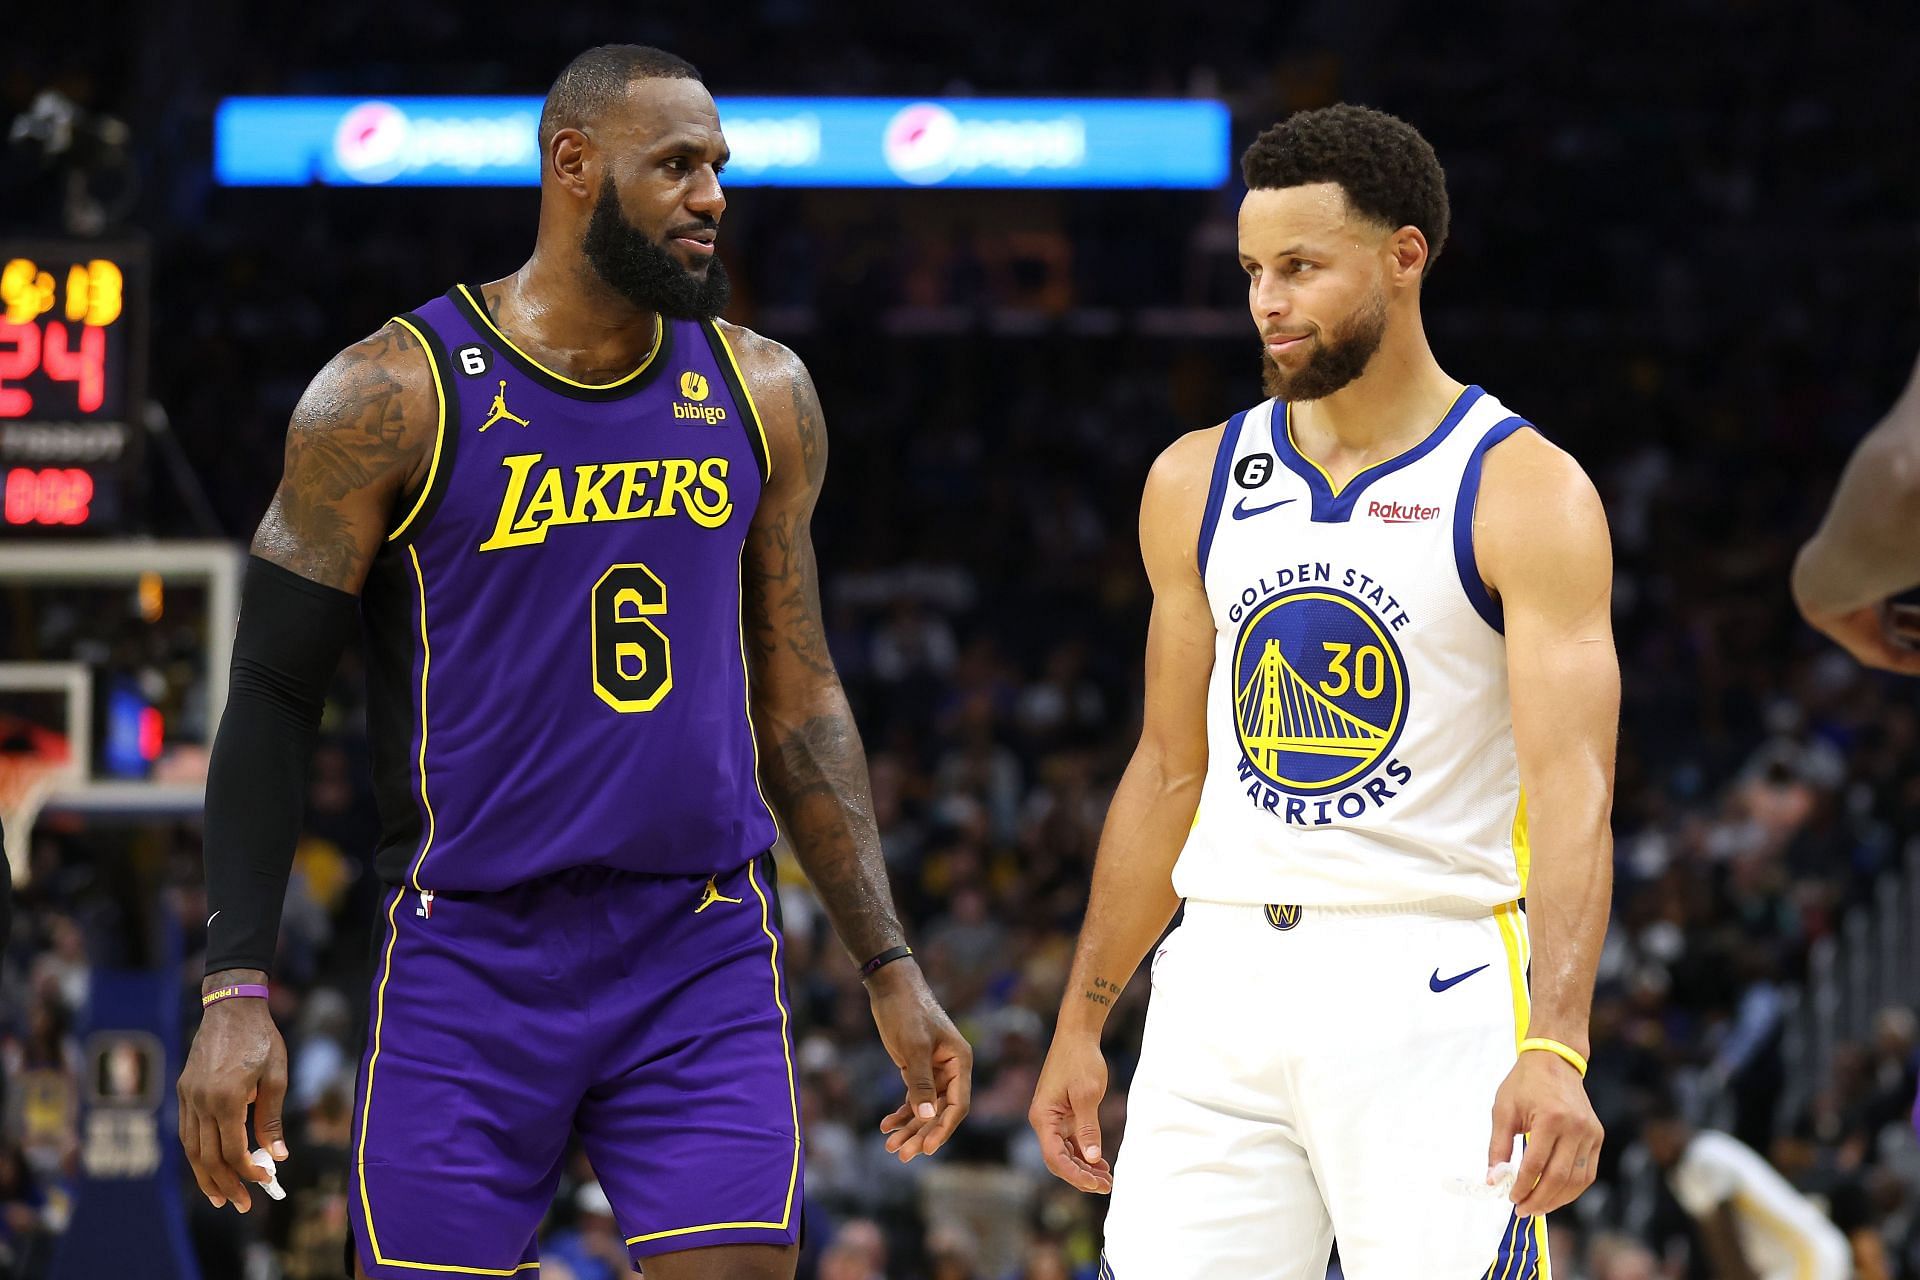 NBA playoffs: Lakers push Warriors to the brink of elimination